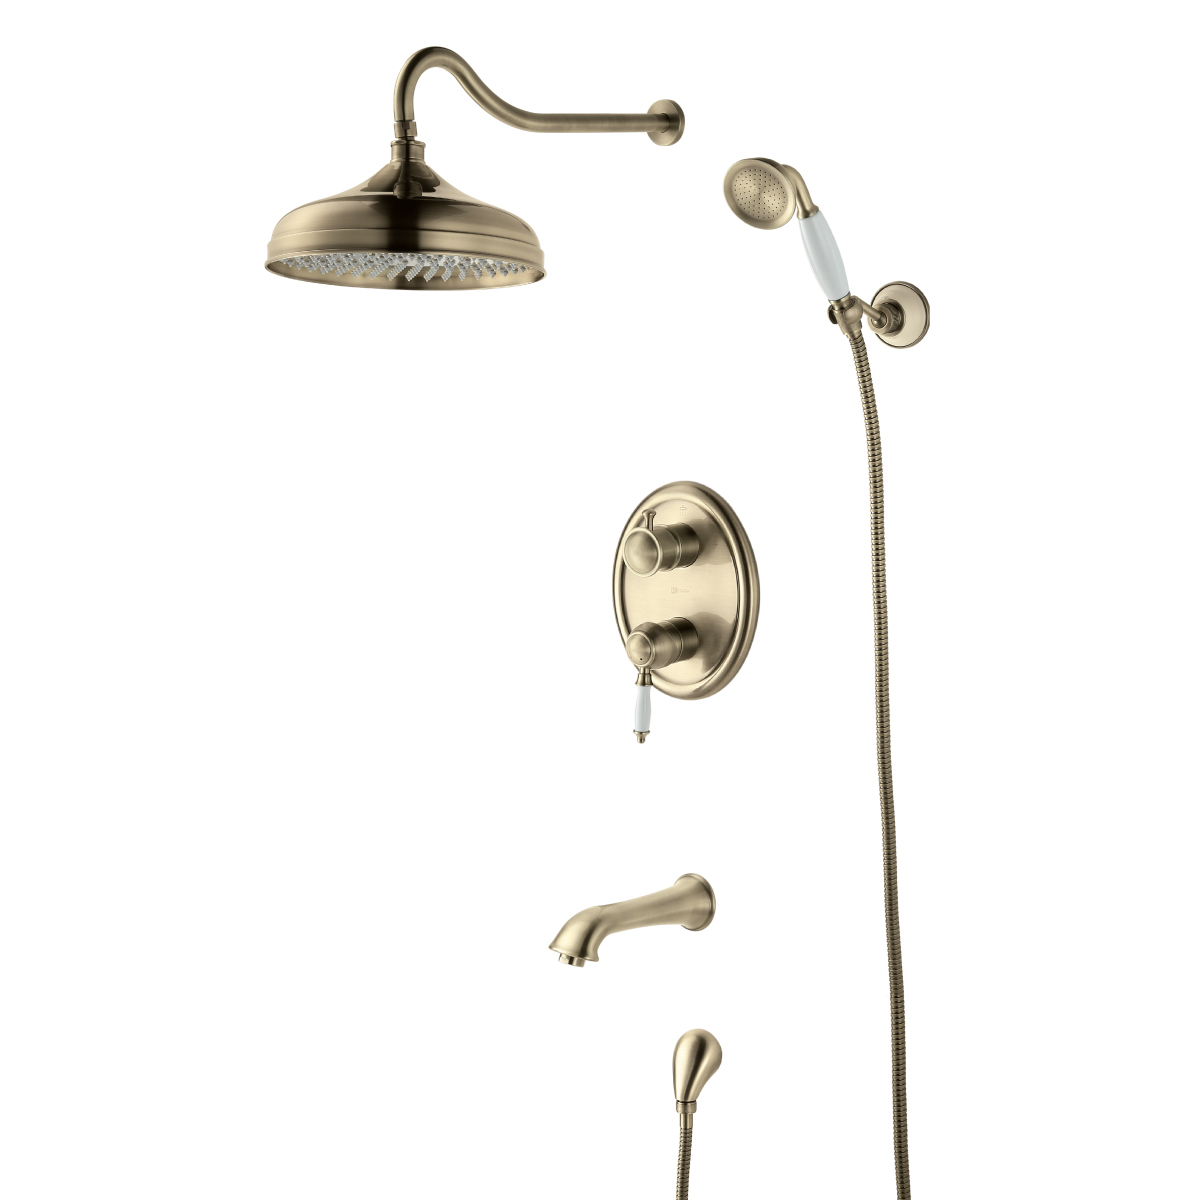 LM4822B Built-in bath and shower faucet